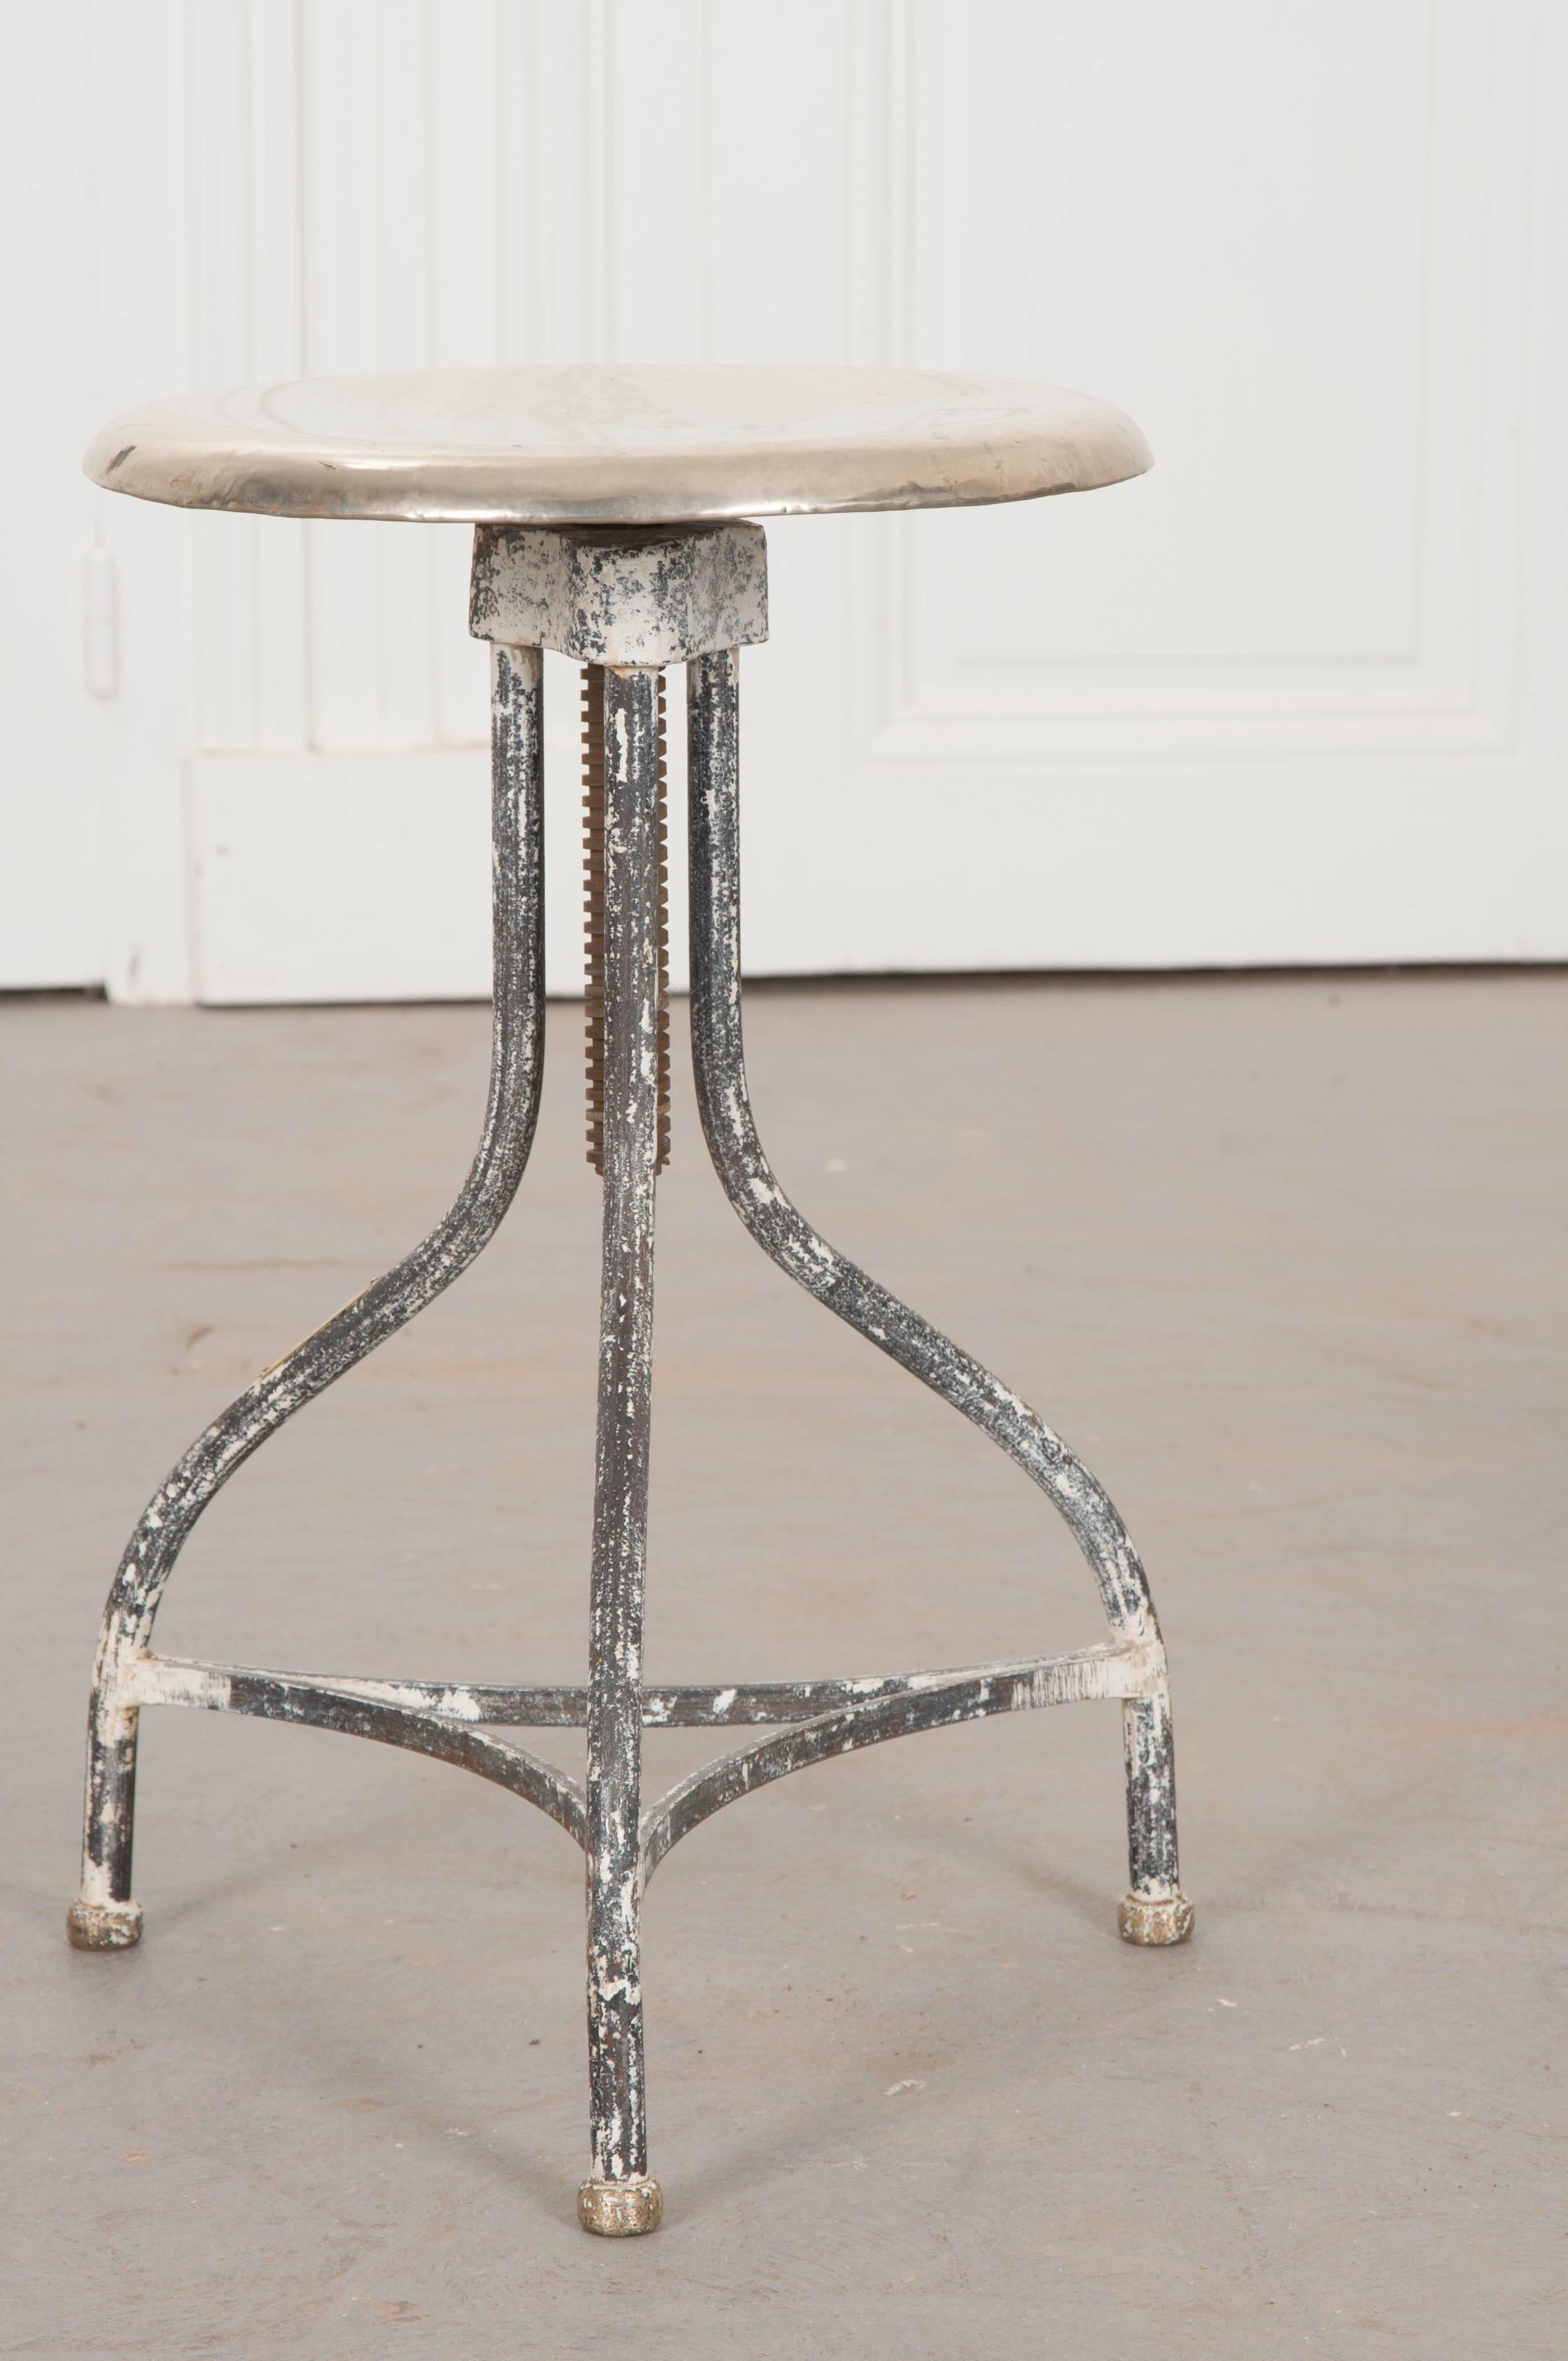 An exceptional stainless steel surgical stool, made in Belgium at the early part of the 20th century. The stool has an adjustable height, so you can elevate or lower the stool to suit your needs. The seat has a diameter of 12 1/2? and can have its